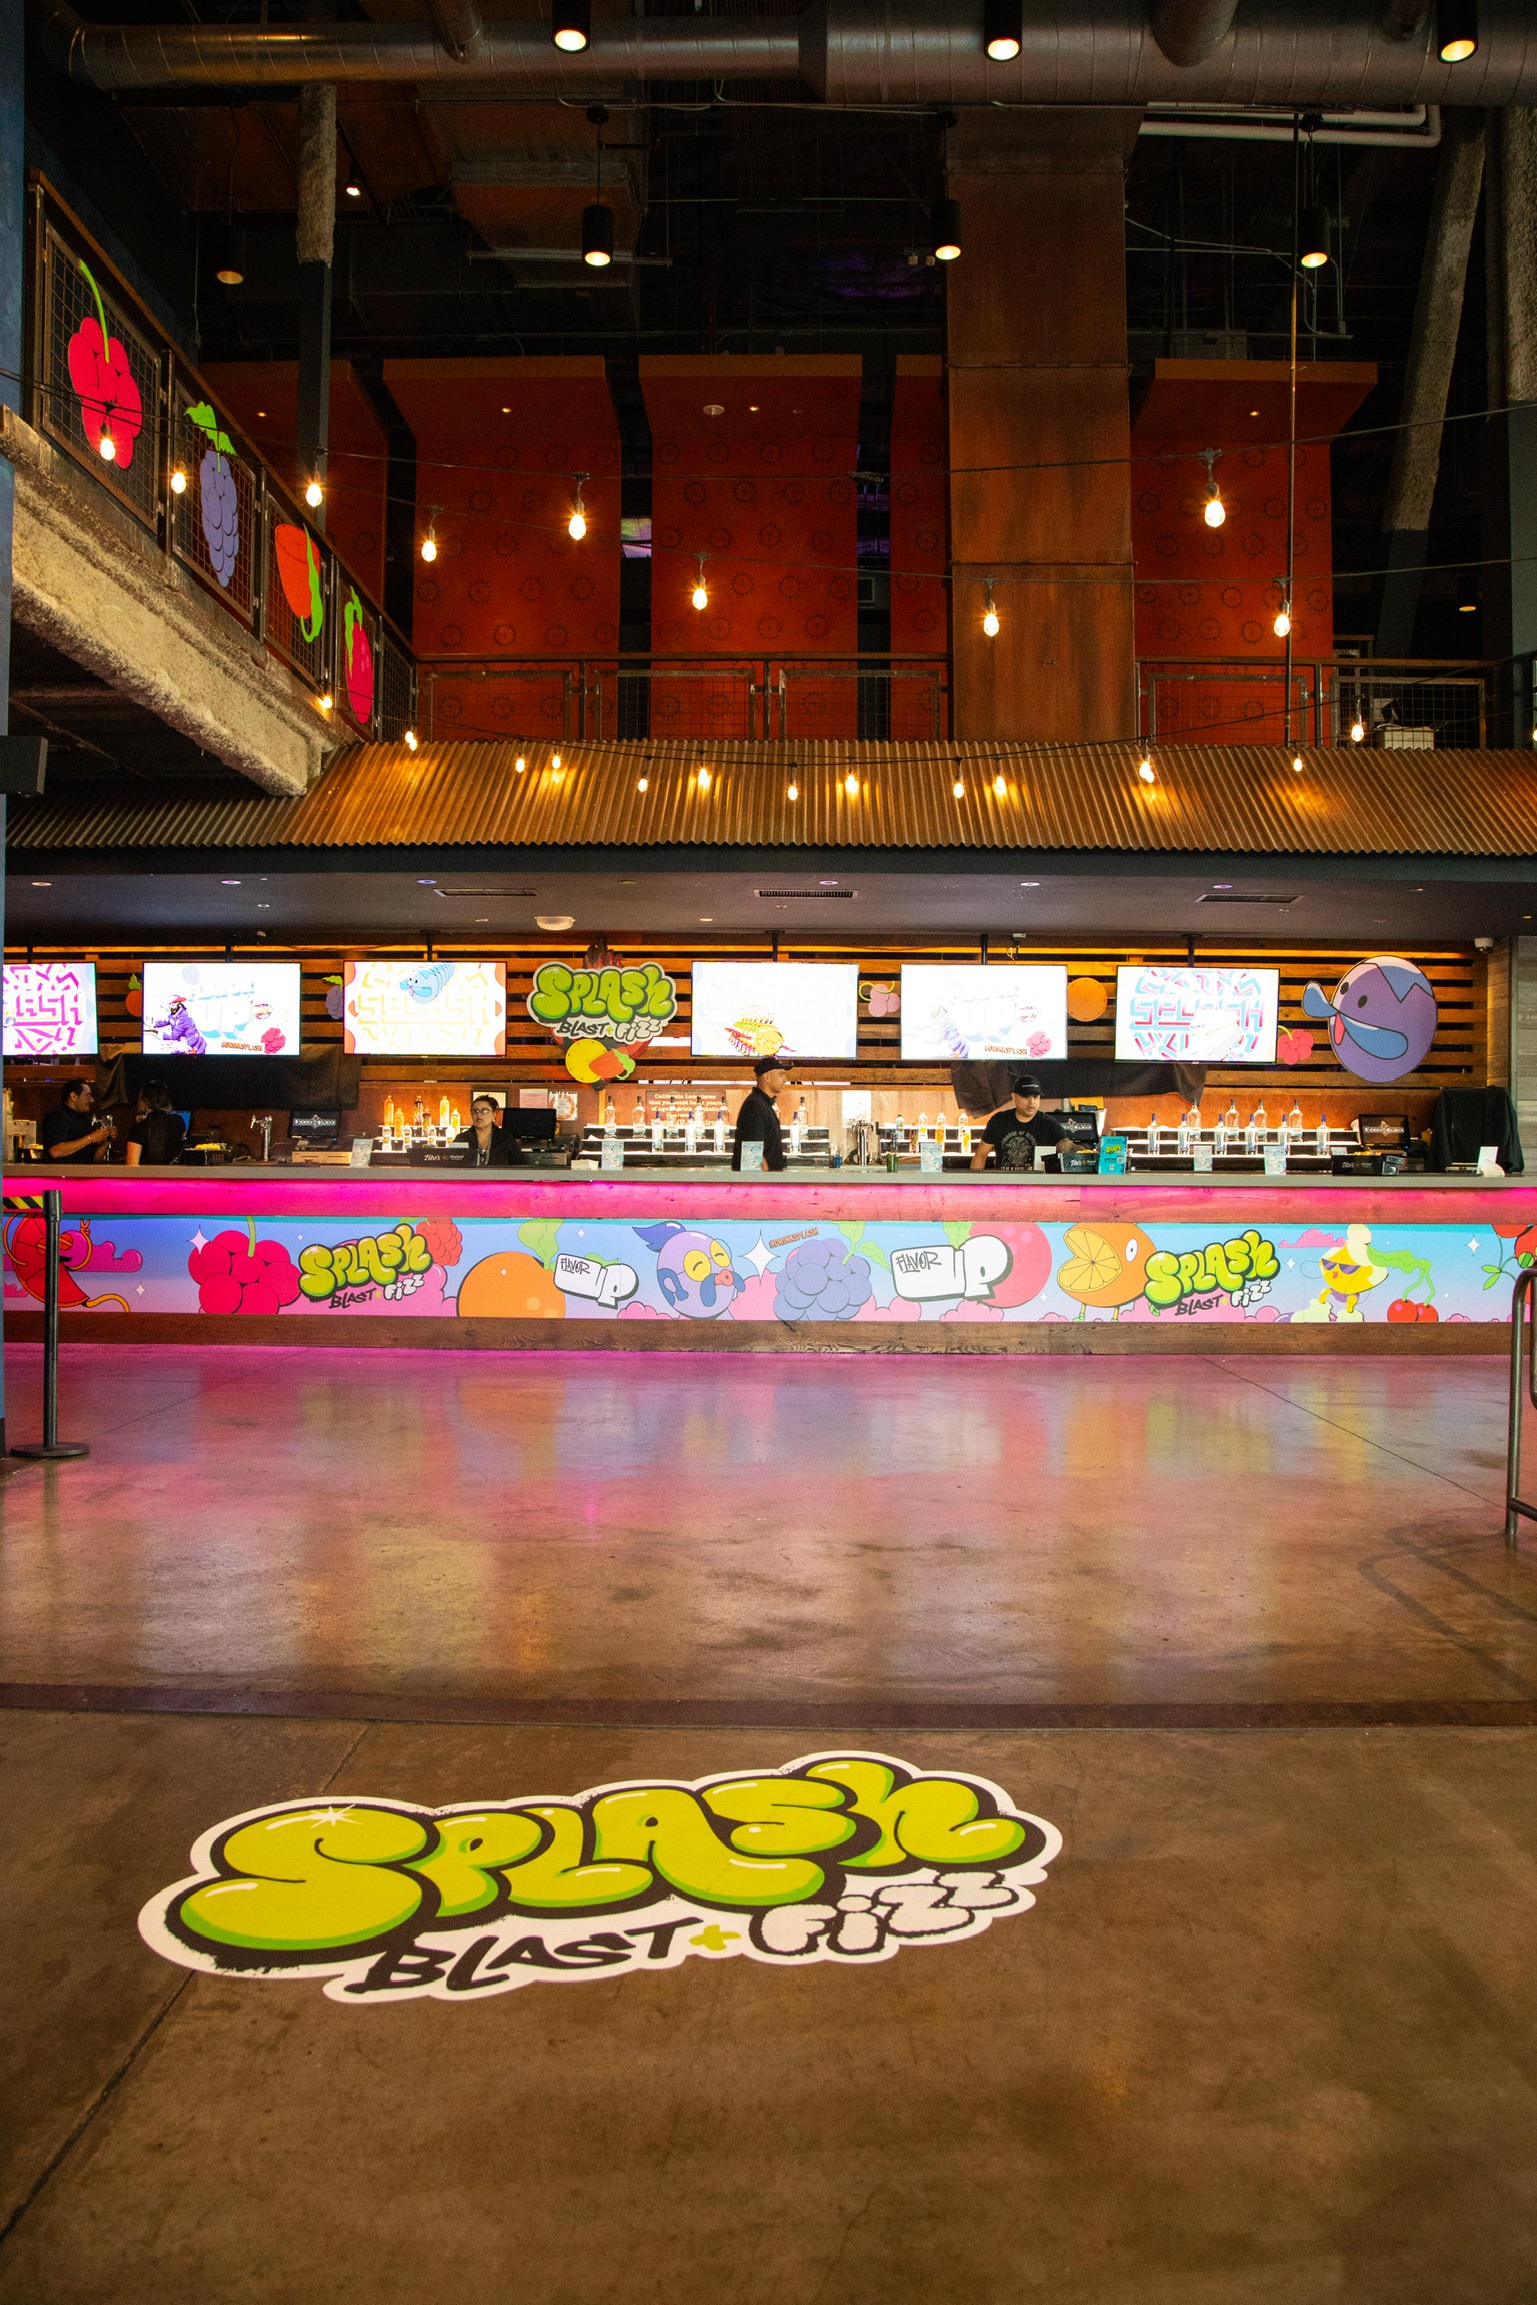 The branded bar and wall decals that served Splash products, edible helium balloons, and dragon's breath candy.